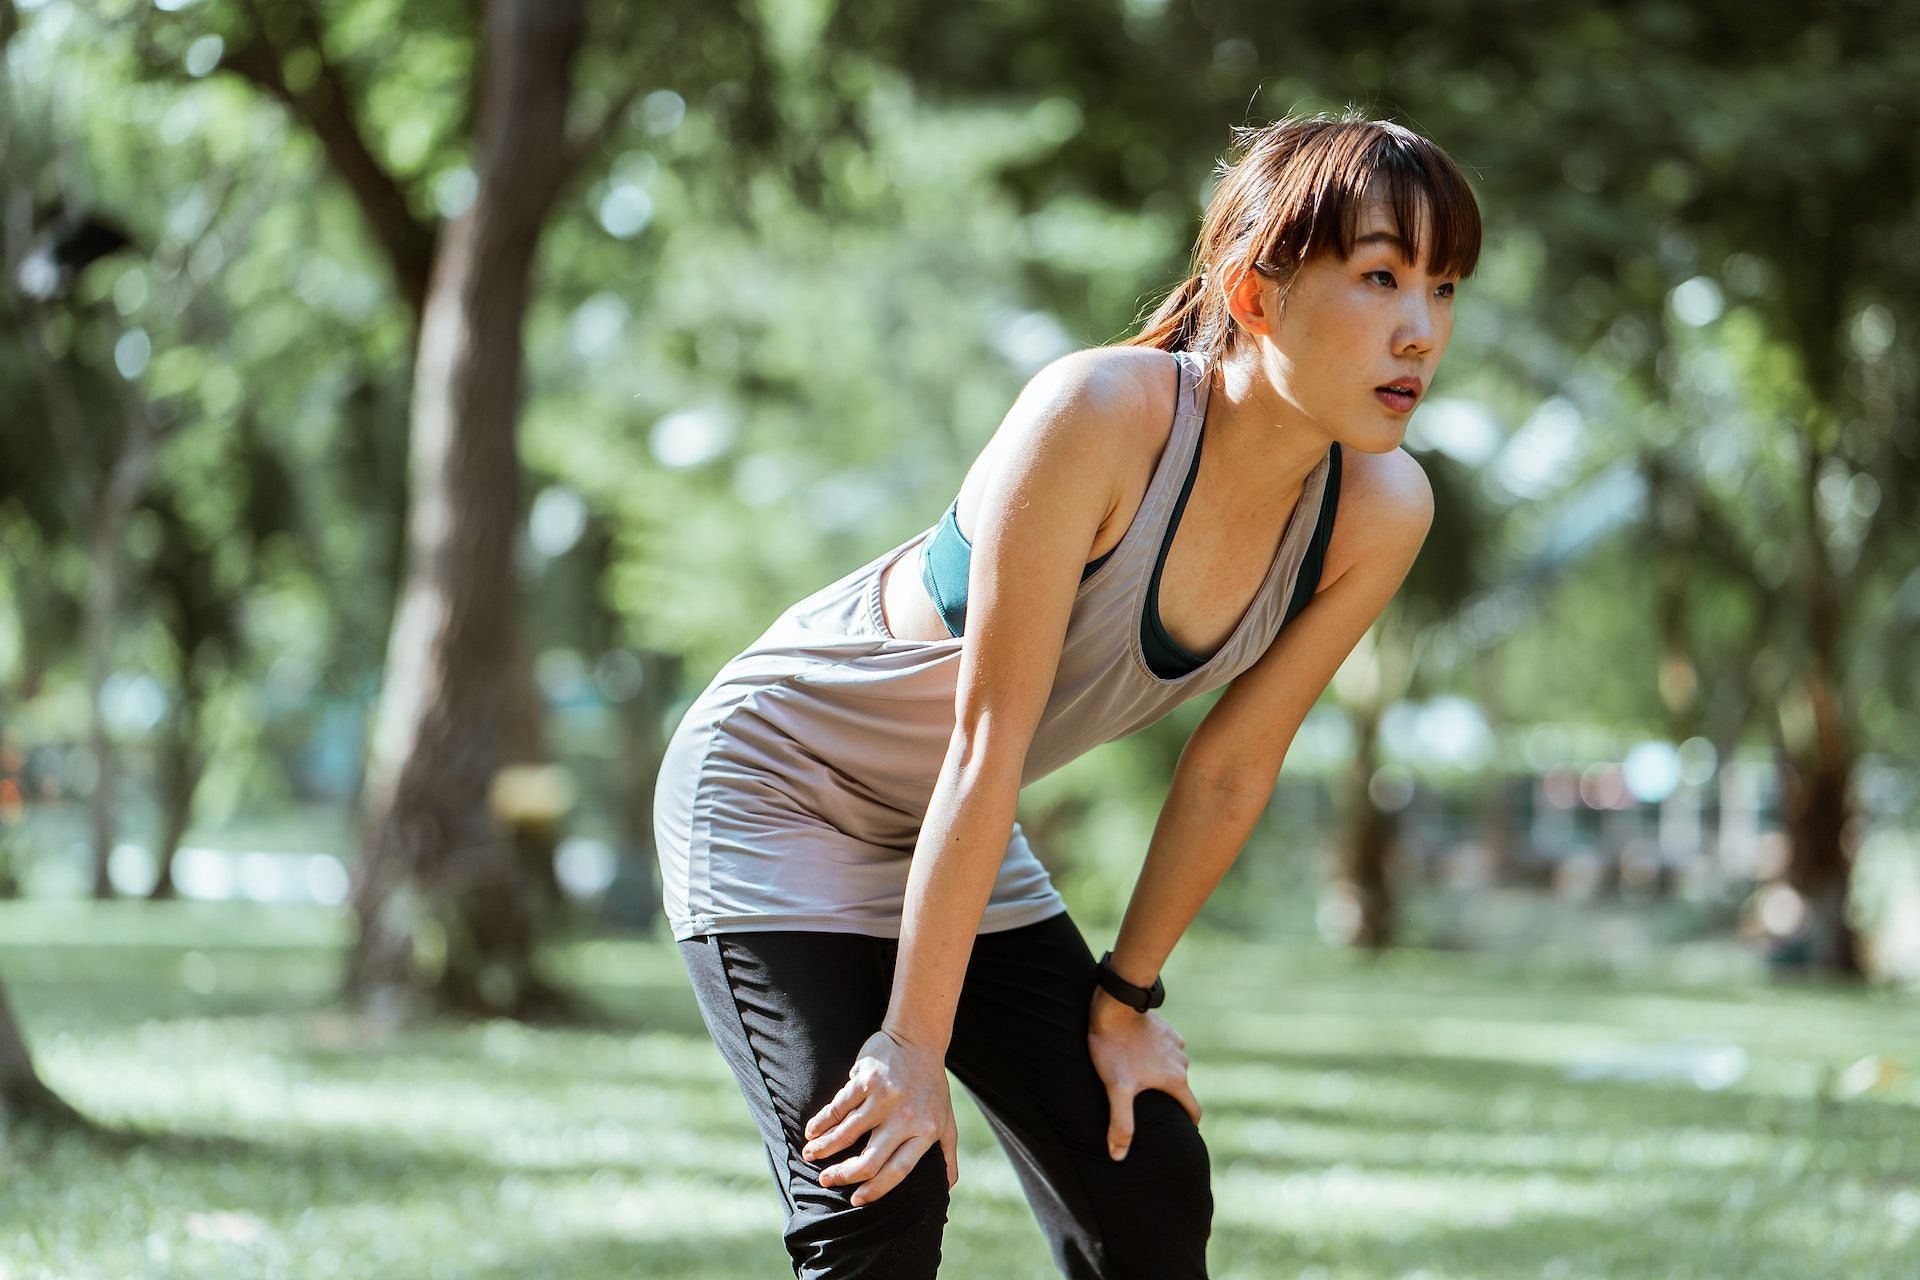 Know the clear symptoms of an exercise burnout. Image credits: (Pexels/ Ketut Subinyato)